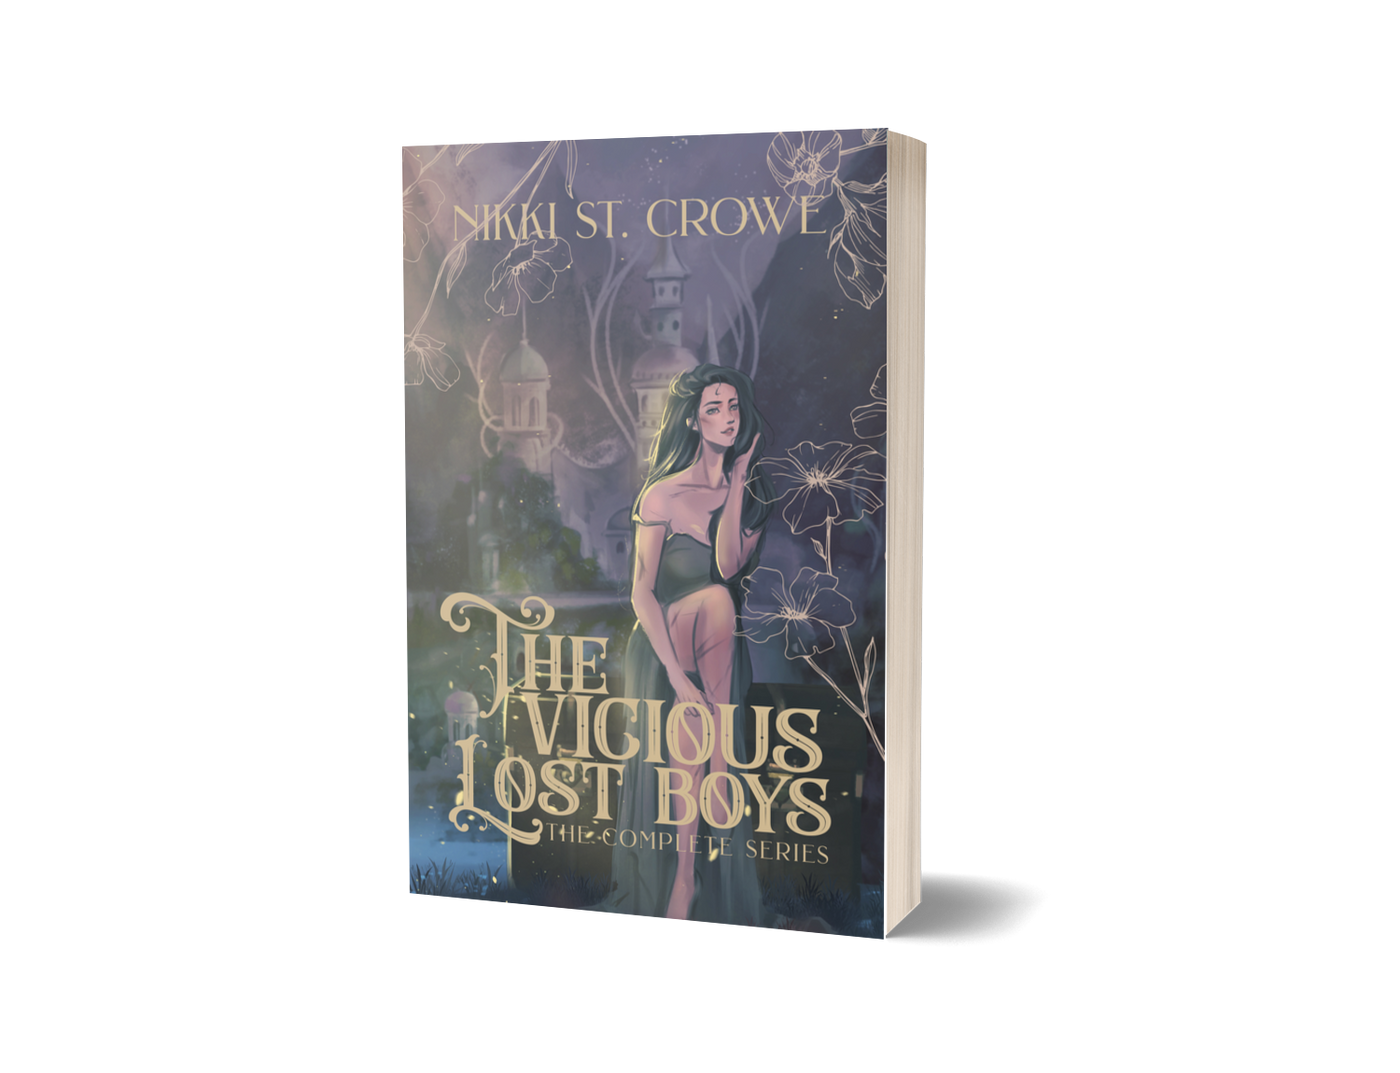 Preorder: Special Edition Omnibus: The Vicious Lost Boys by Nikki St. Crowe